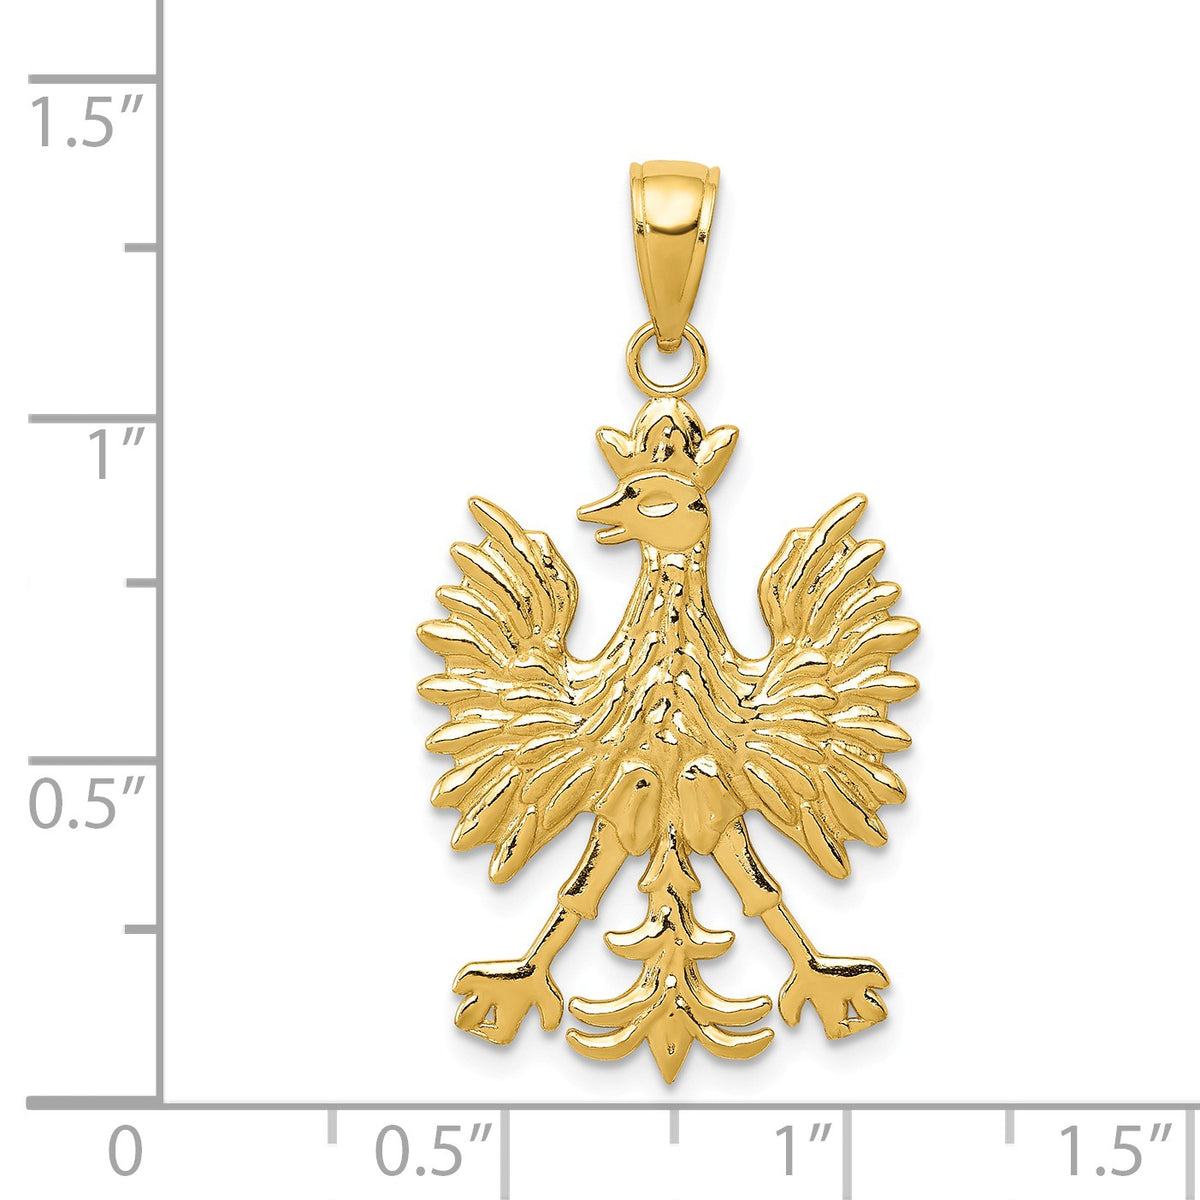 Alternate view of the 14k Yellow Gold Polish Eagle Pendant by The Black Bow Jewelry Co.